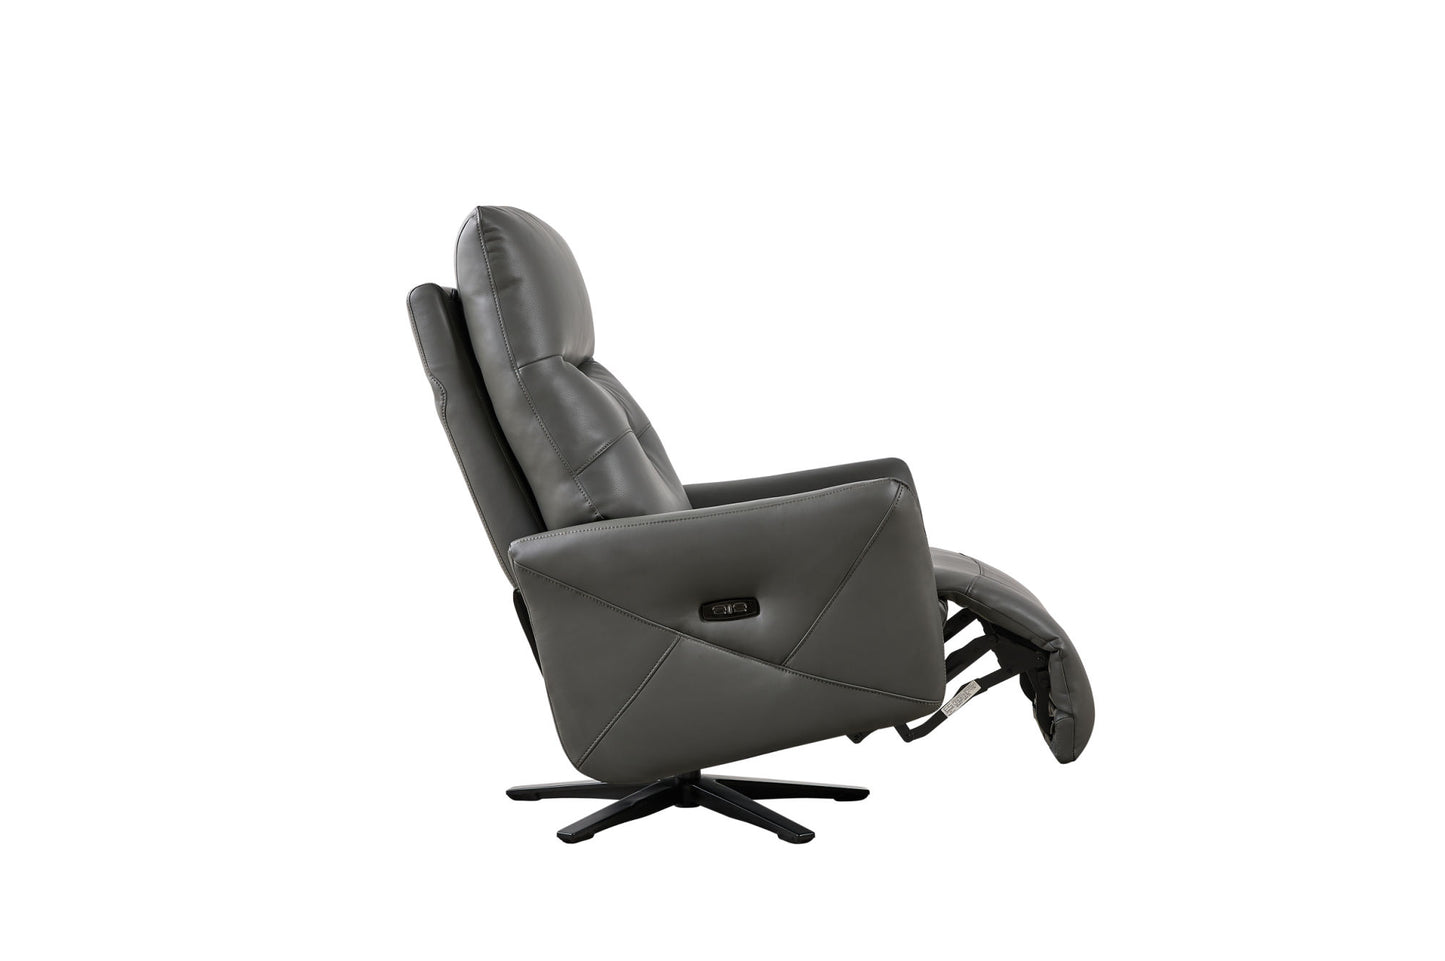 Recliner Chair with Dual Motor, Euro contemporary design